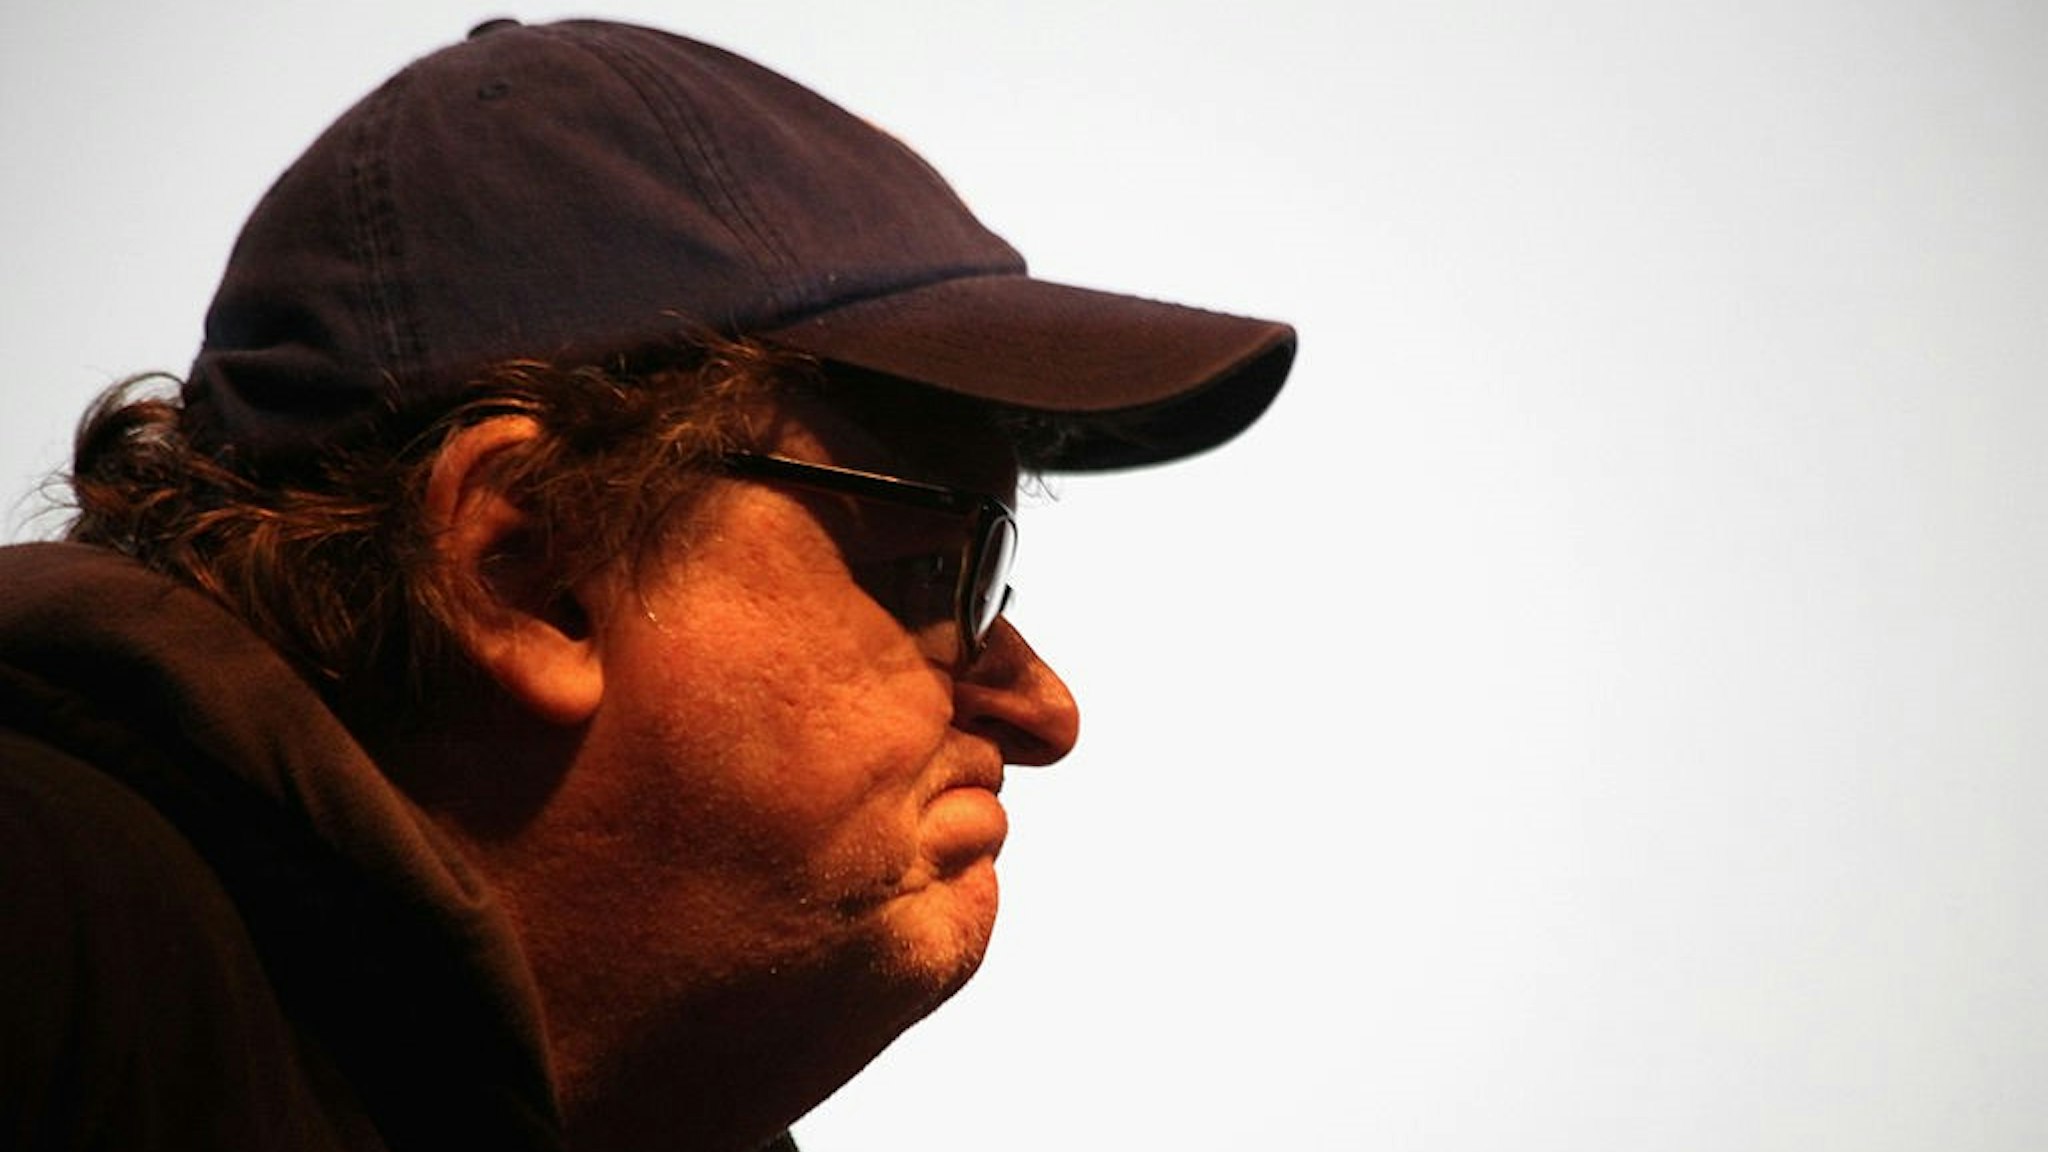 Michael Moore attends The MoveOn.org Movie Screening And Panel On Reducing Gun Violence at SVA Theater on March 23, 2013 in New York City.